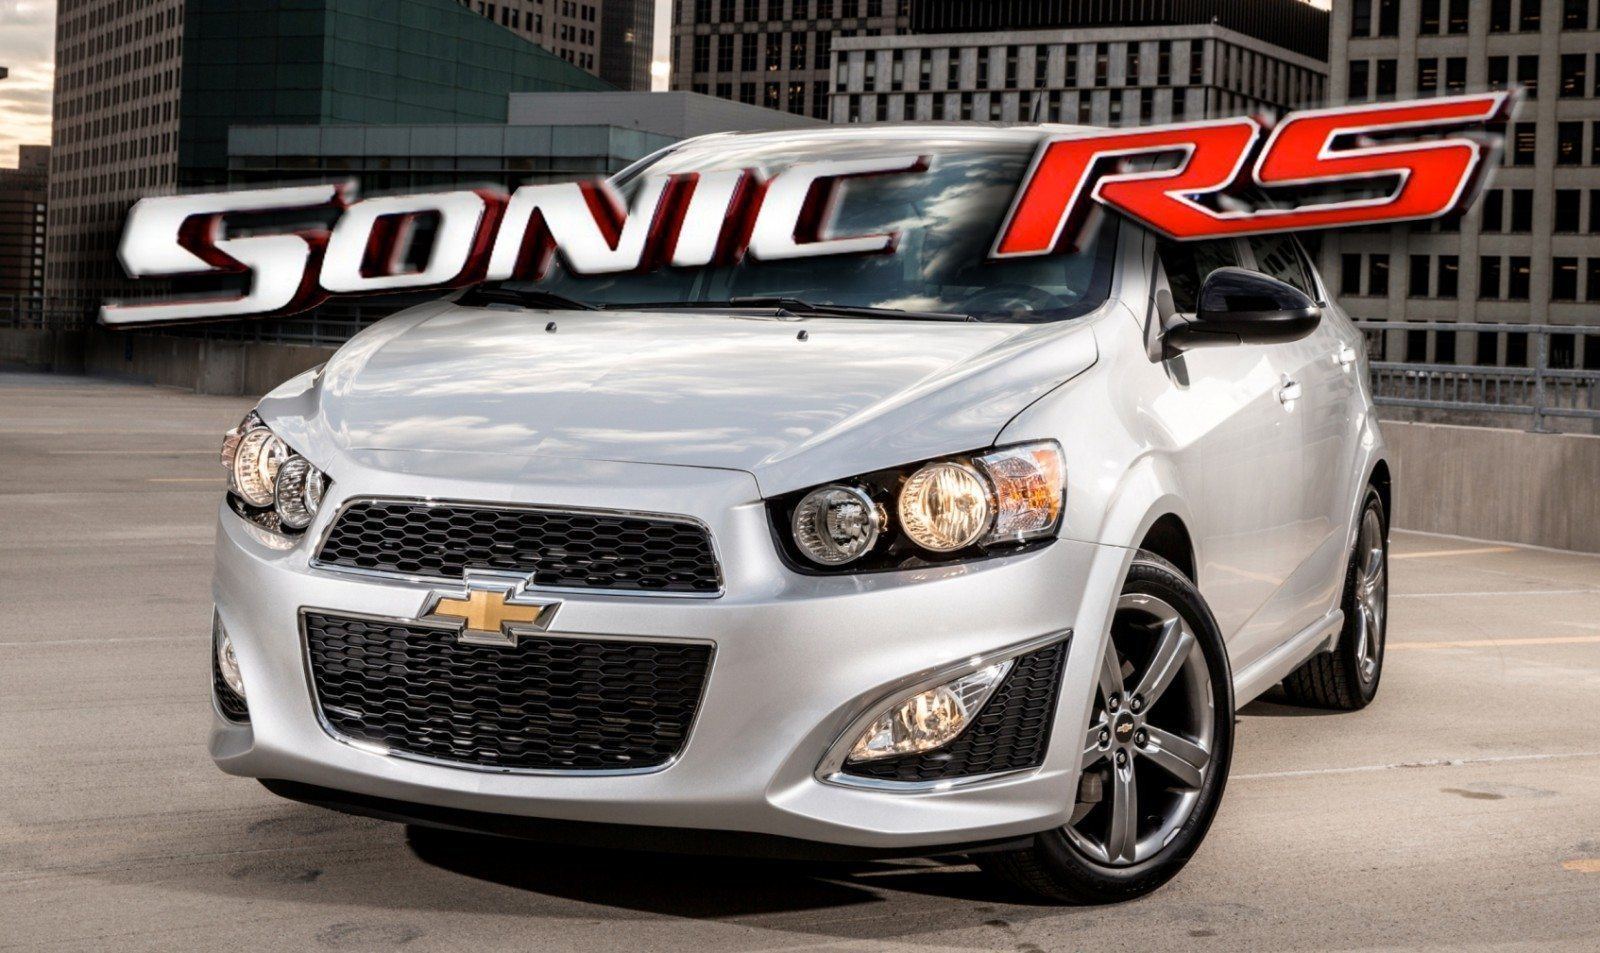 2015 Chevy Sonic RS Sedan and LTZ Dusk Join Cool RS Hatch With Dark